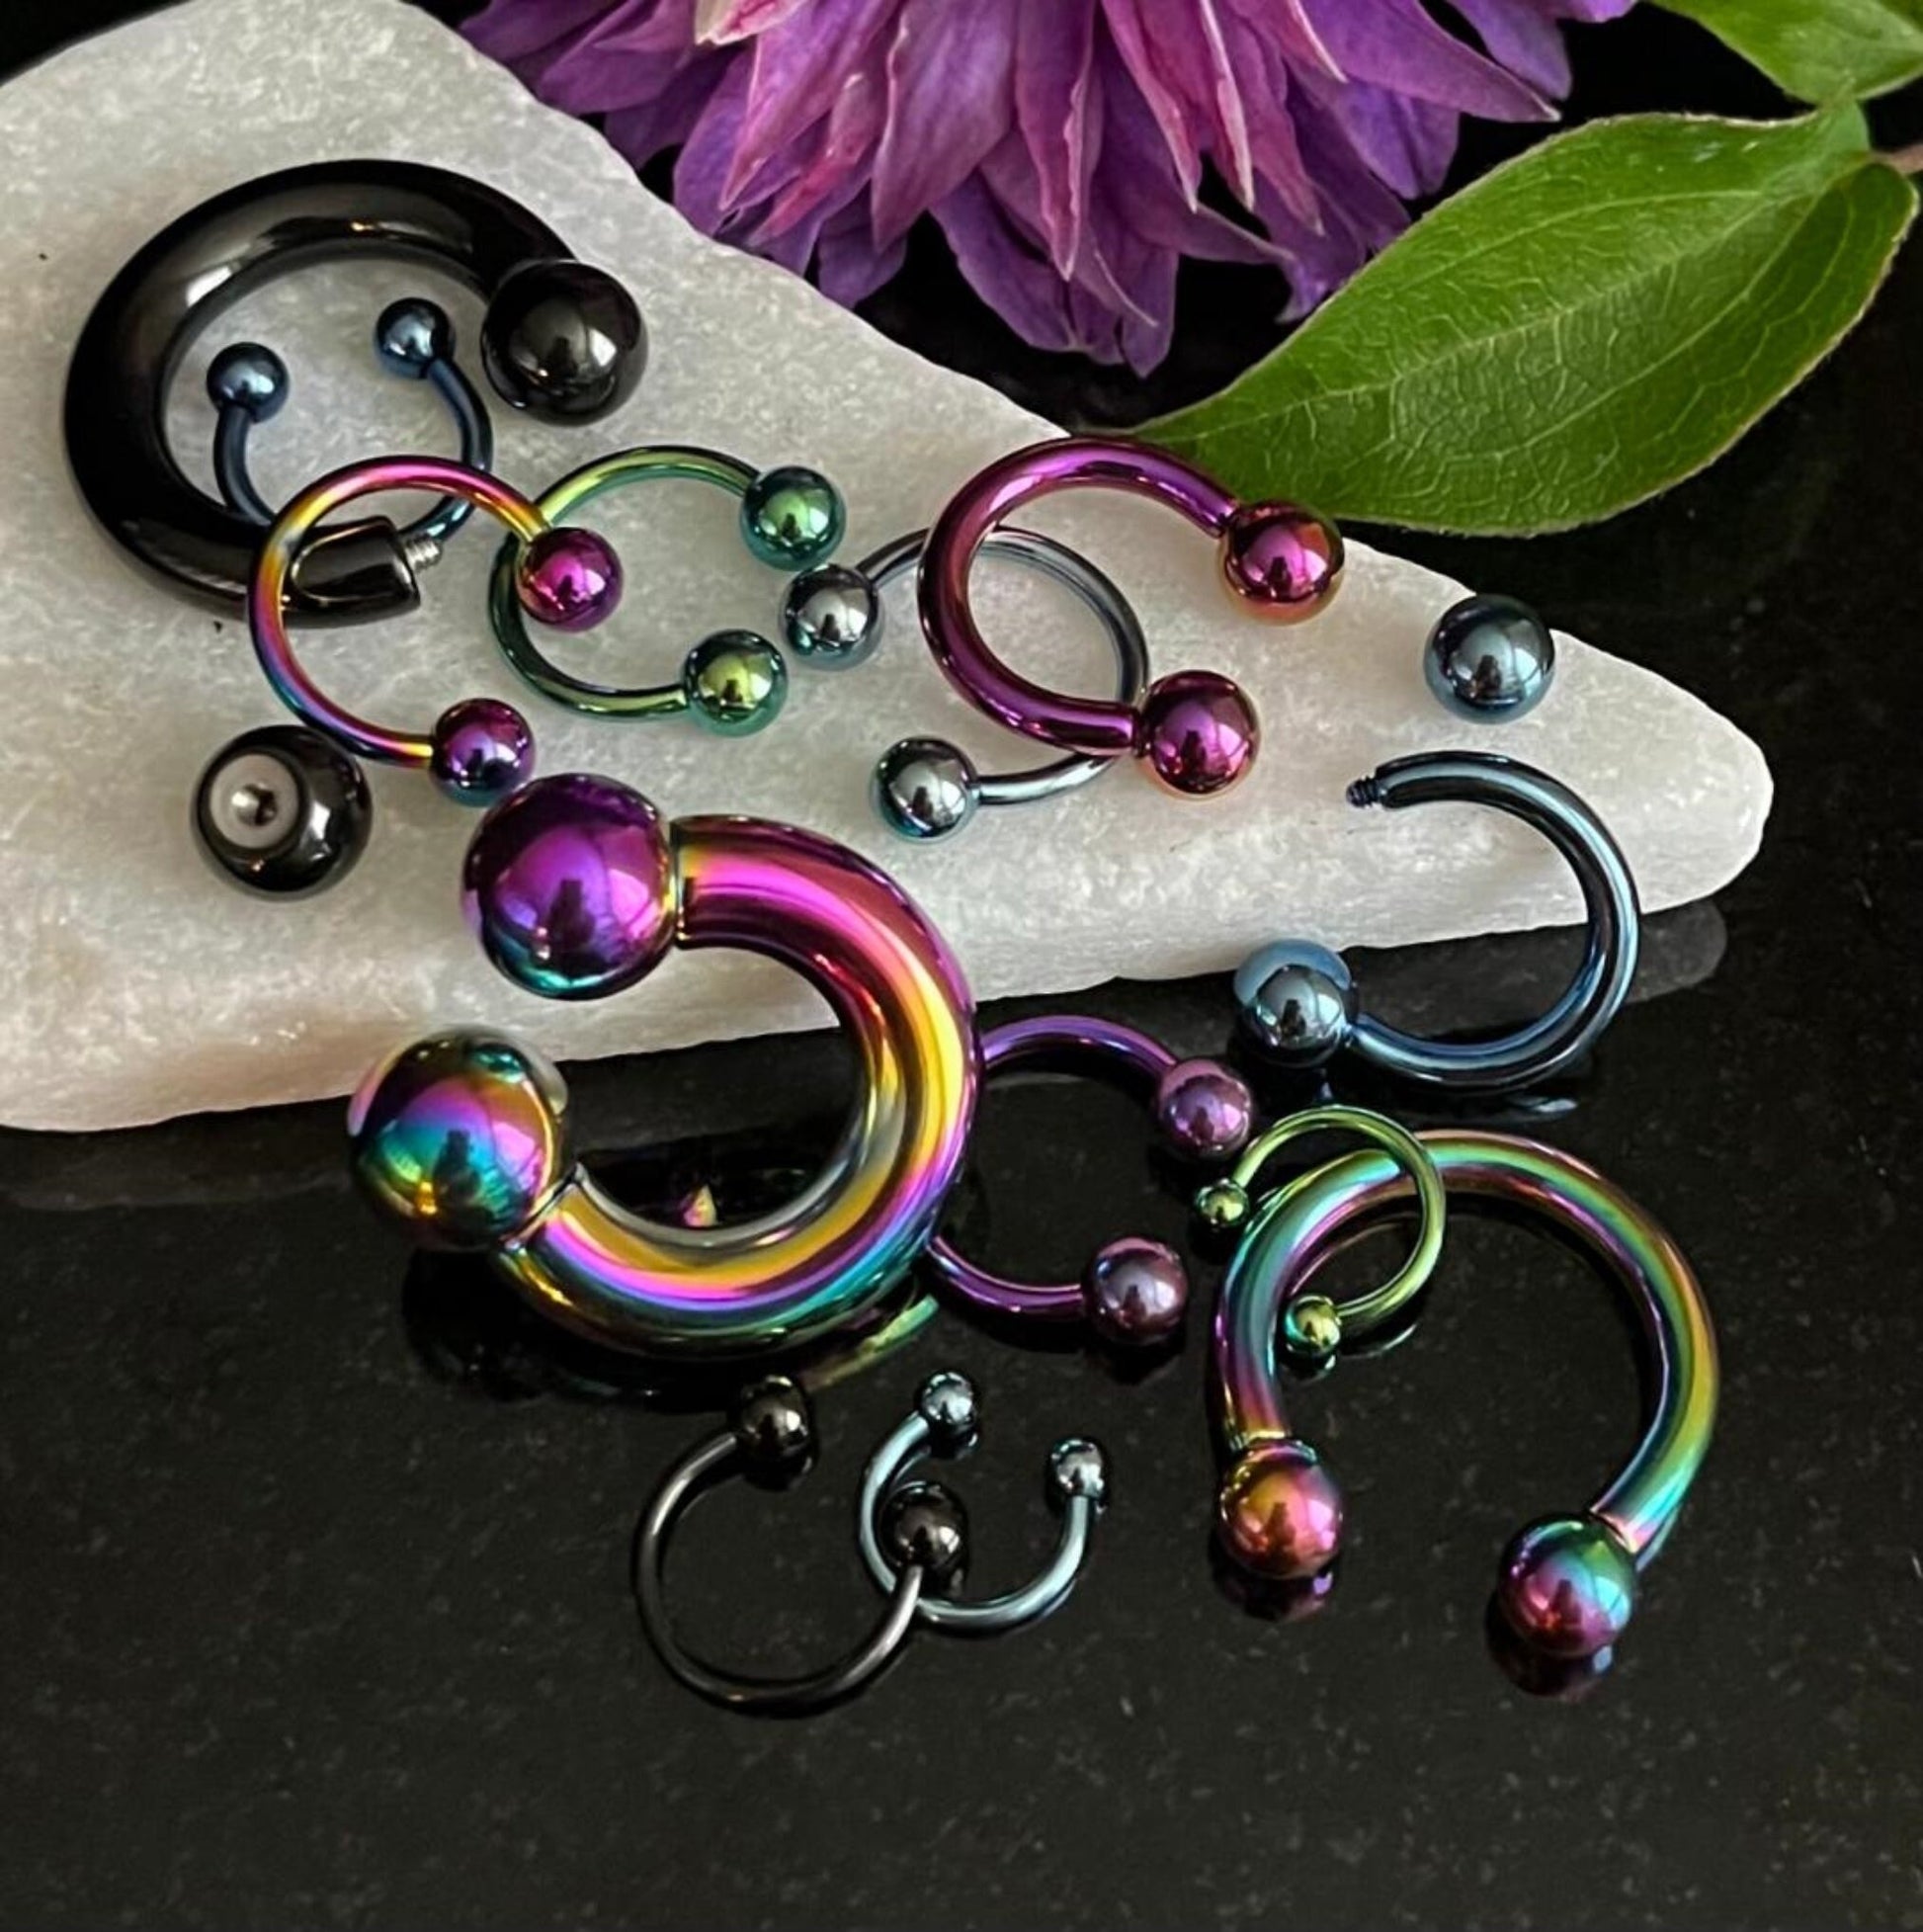 1 Piece Unique Rainbow Titanium Anodized Circular Barbell Horseshoe Ring - 18g thru 2g with Assorted Internal Diameter and Ball Size!!